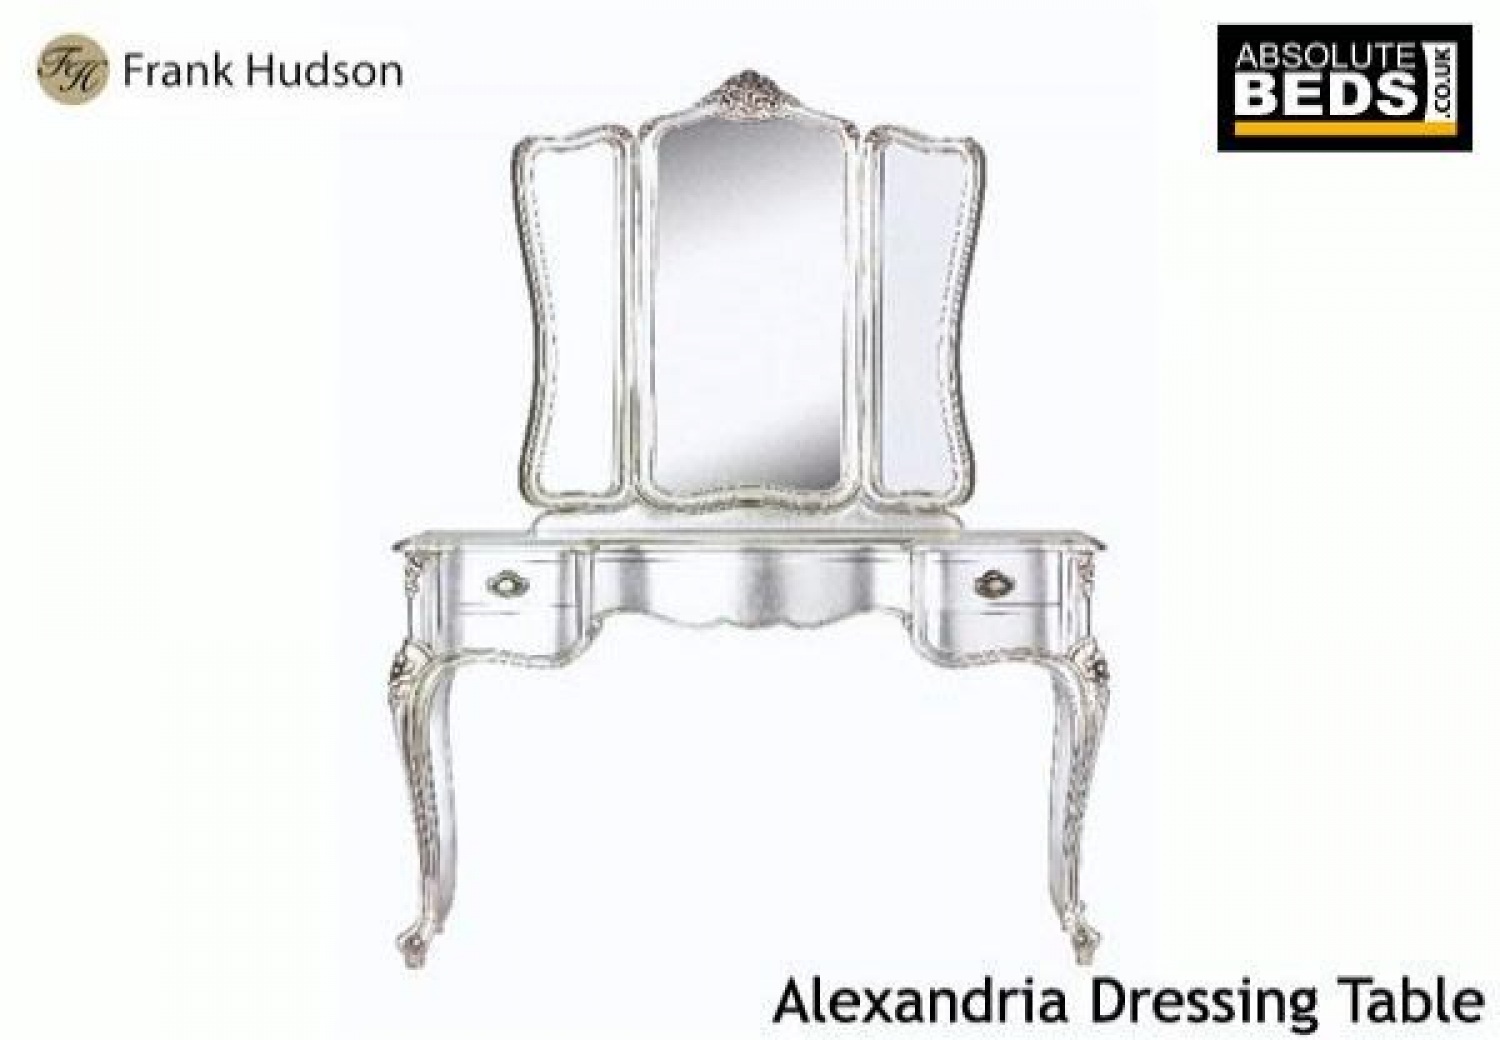 frank hudson alexandria dressing table with mirror image